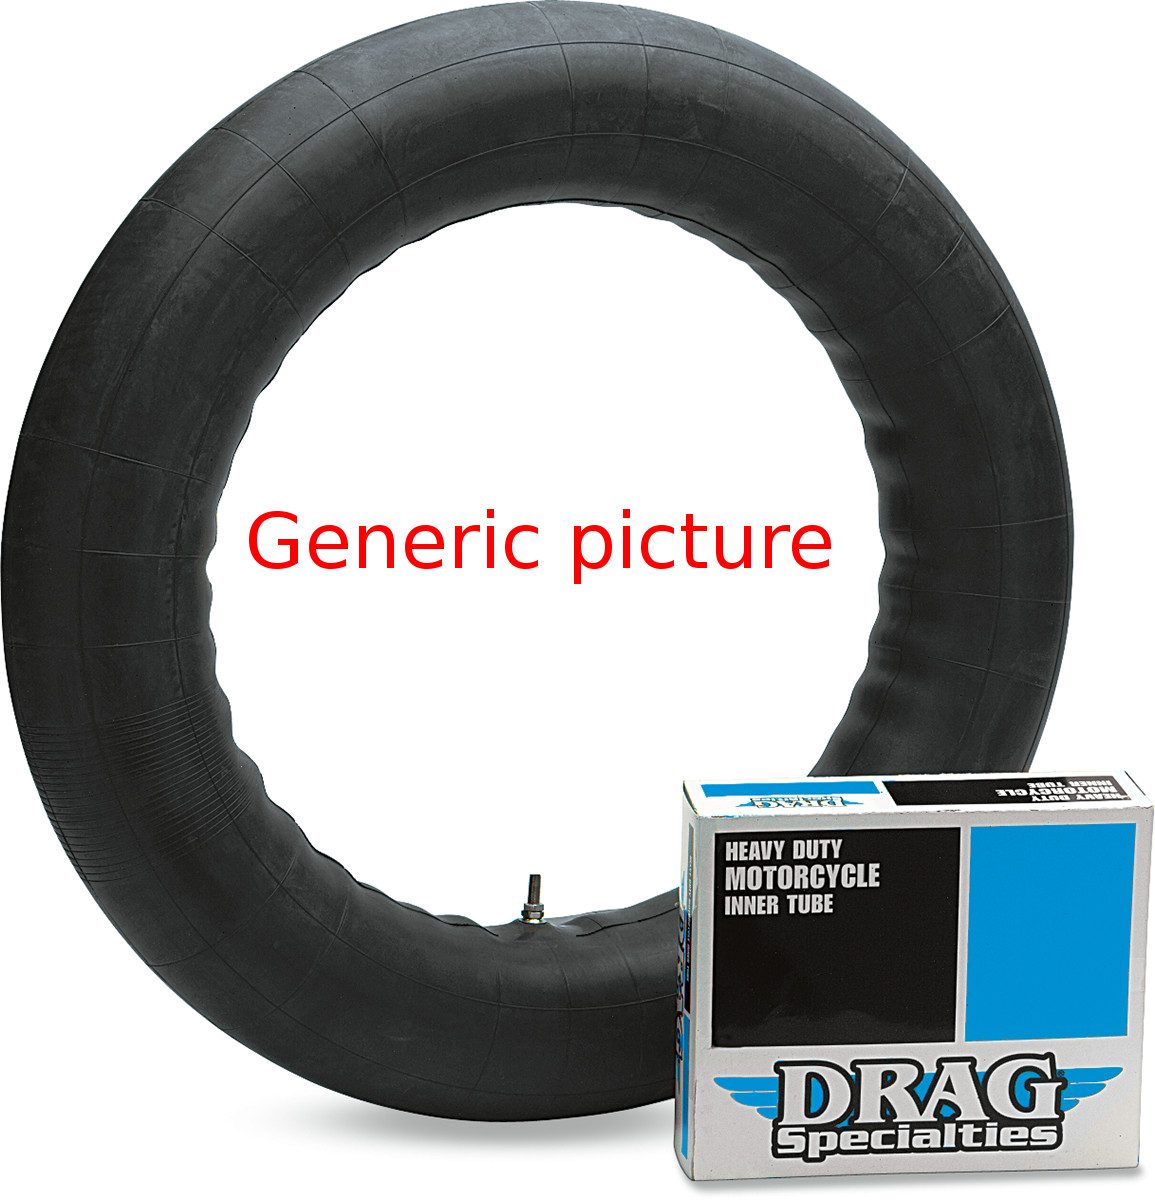 Heavy Duty Inner Tube 130/90-16 Side Metal Valve - Click Image to Close